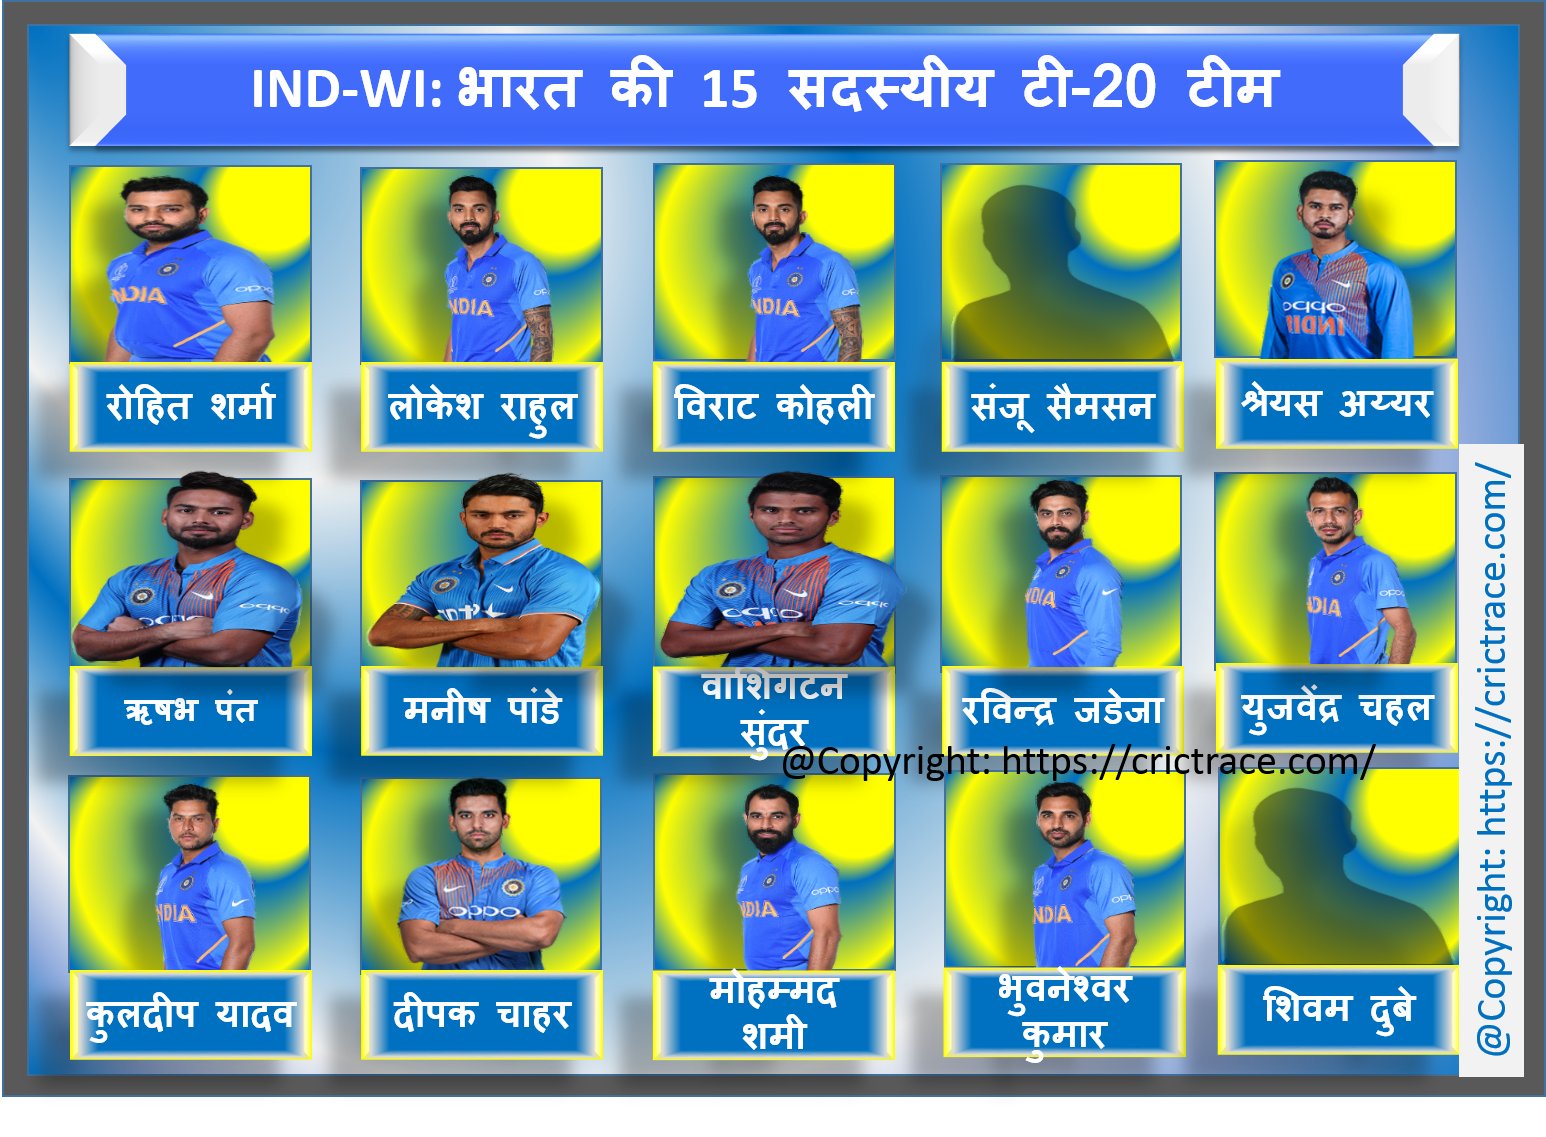 IND vs WI T-20